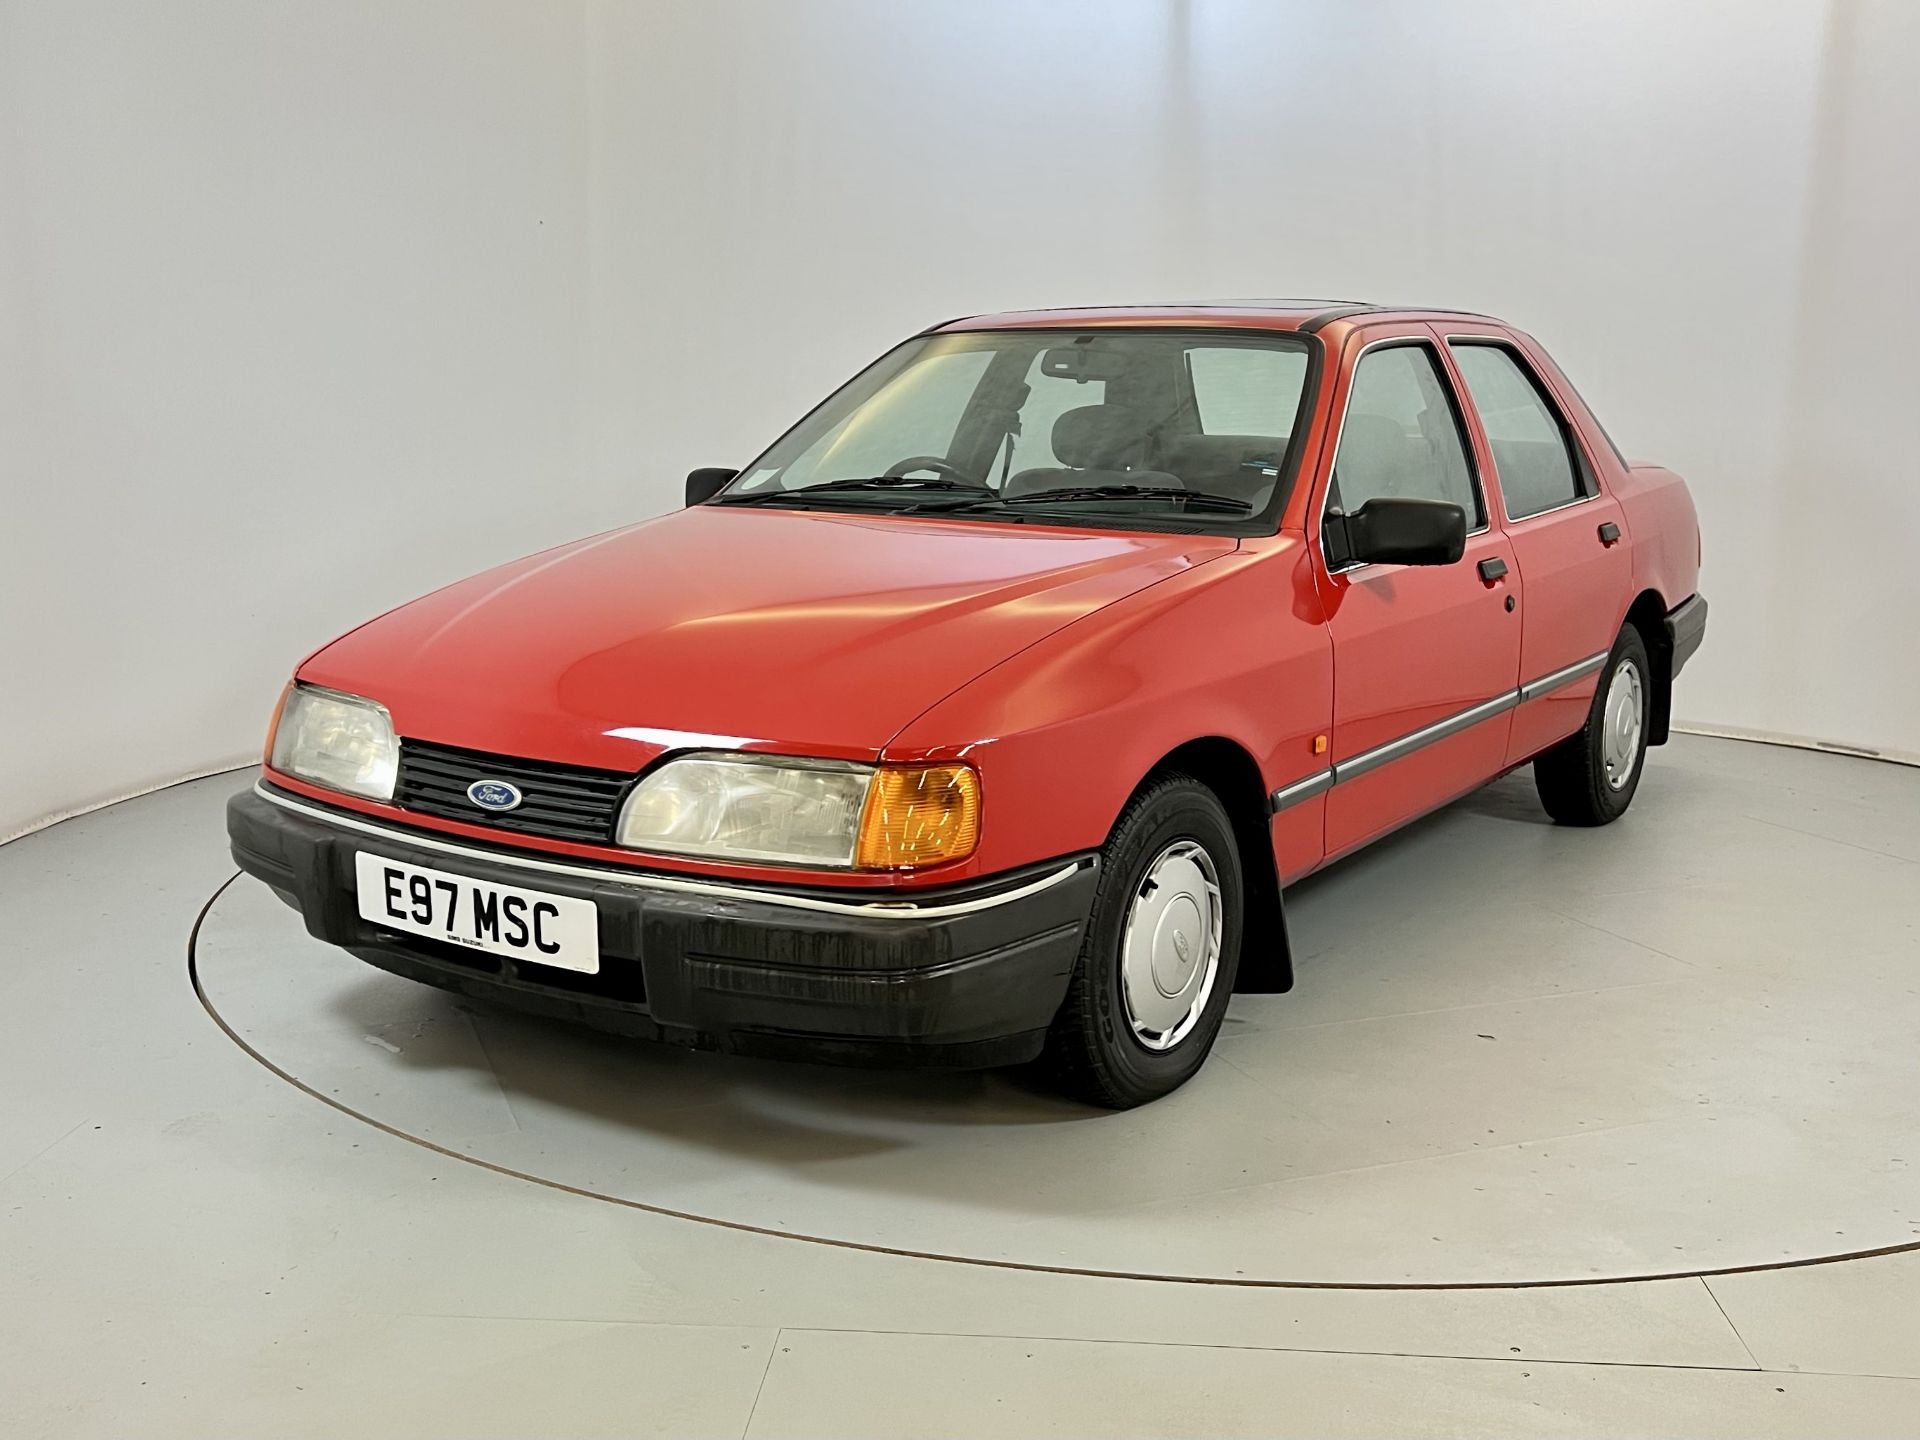 Ford Sierra Sapphire - Image 3 of 34